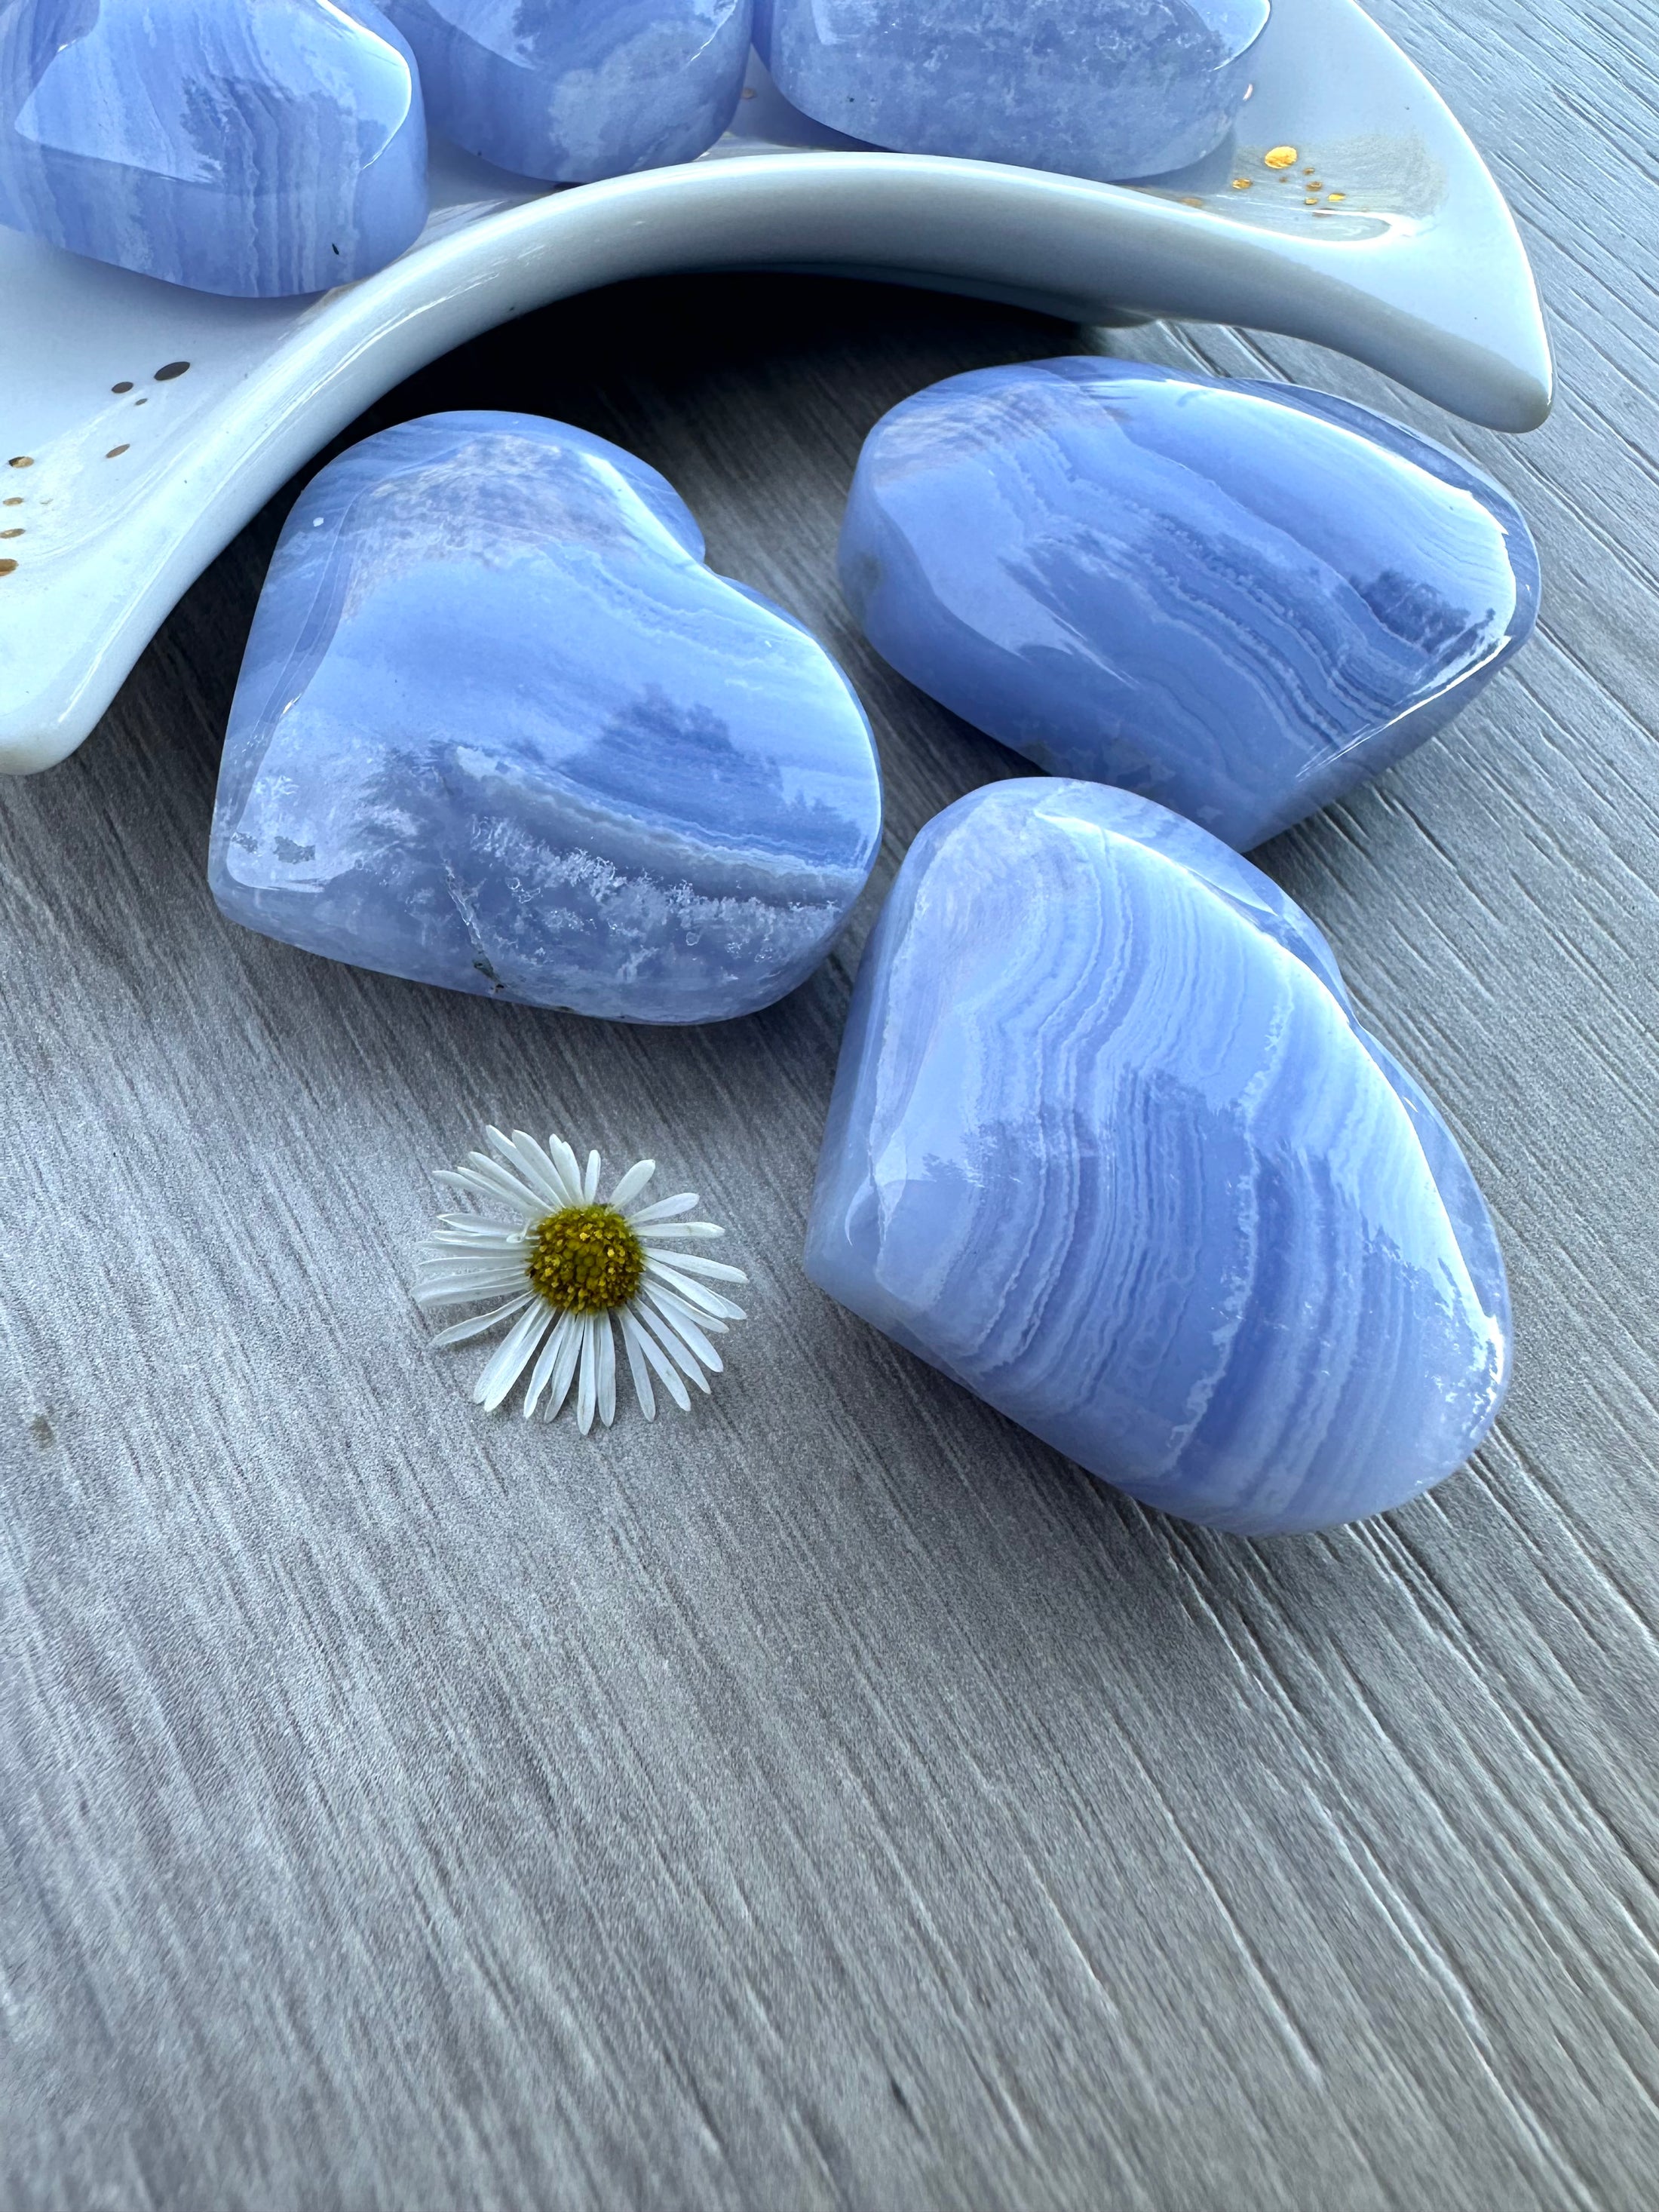 High-Quality Thick & Plump Blue Lace Agate Puffy Hearts